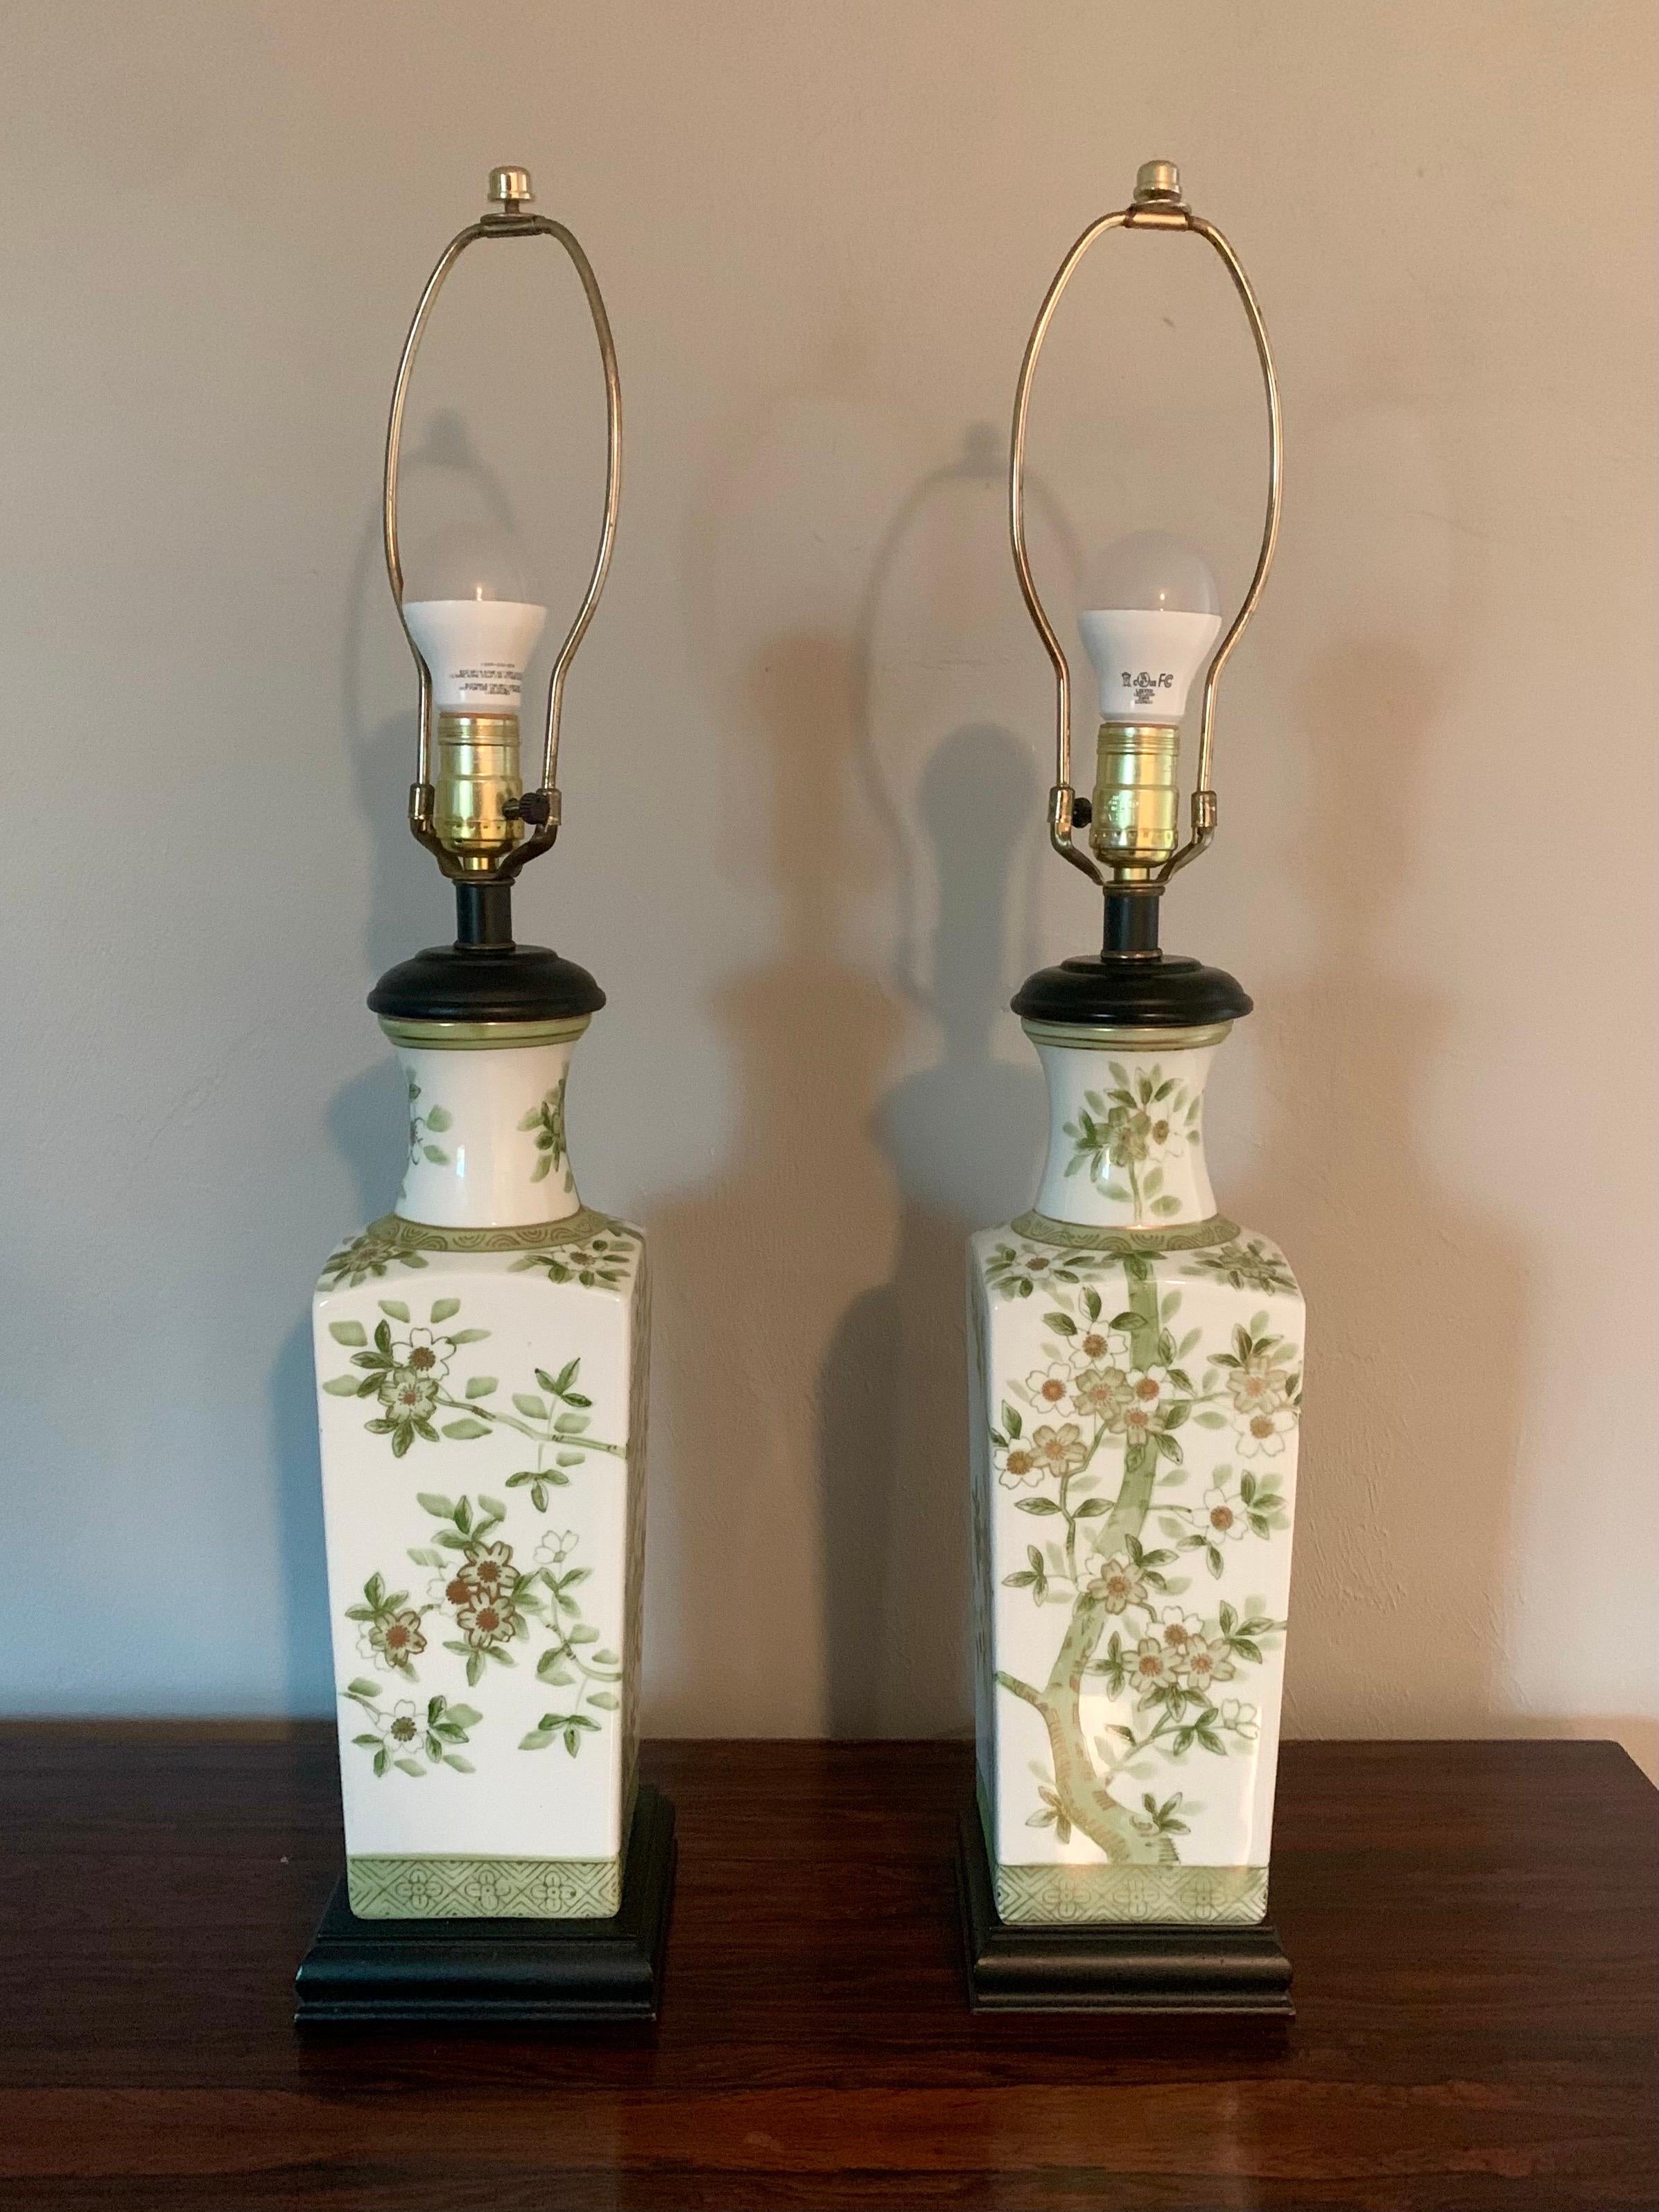 Pair of elegant porcelain lamps from Japan. Circa 1940s - 1950s. A glossy white vase. Adorned by images of cherry blossoms on all sides. Hand painted with various tones of green and gold. 

Black wooden base. 

Sold with out shades.